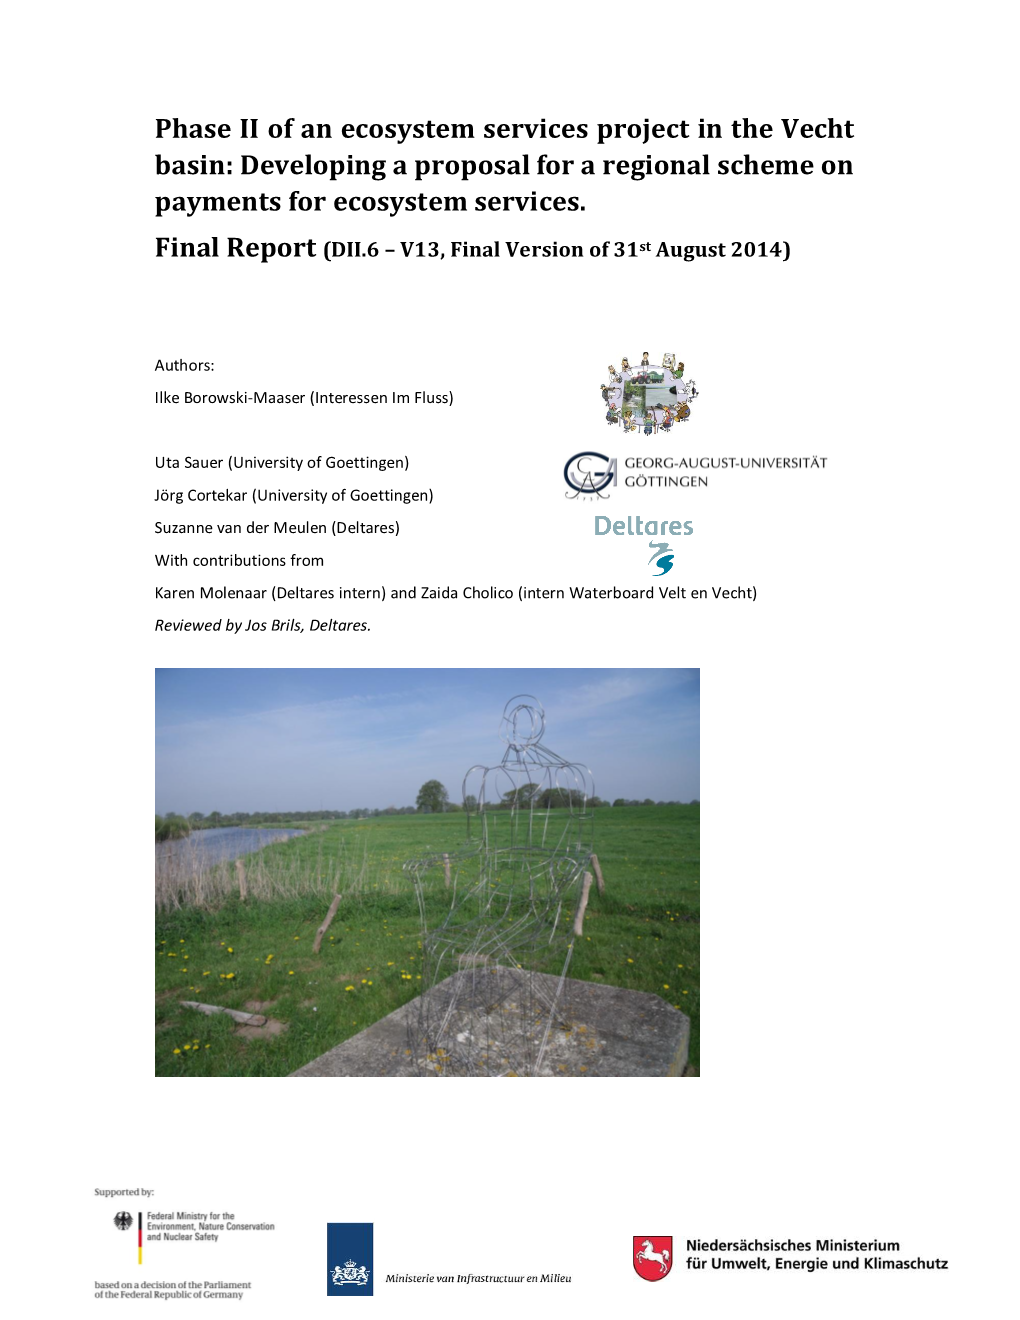 Phase II of an Ecosystem Services Project in the Vecht Basin: Developing a Proposal for a Regional Scheme on Payments for Ecosystem Services